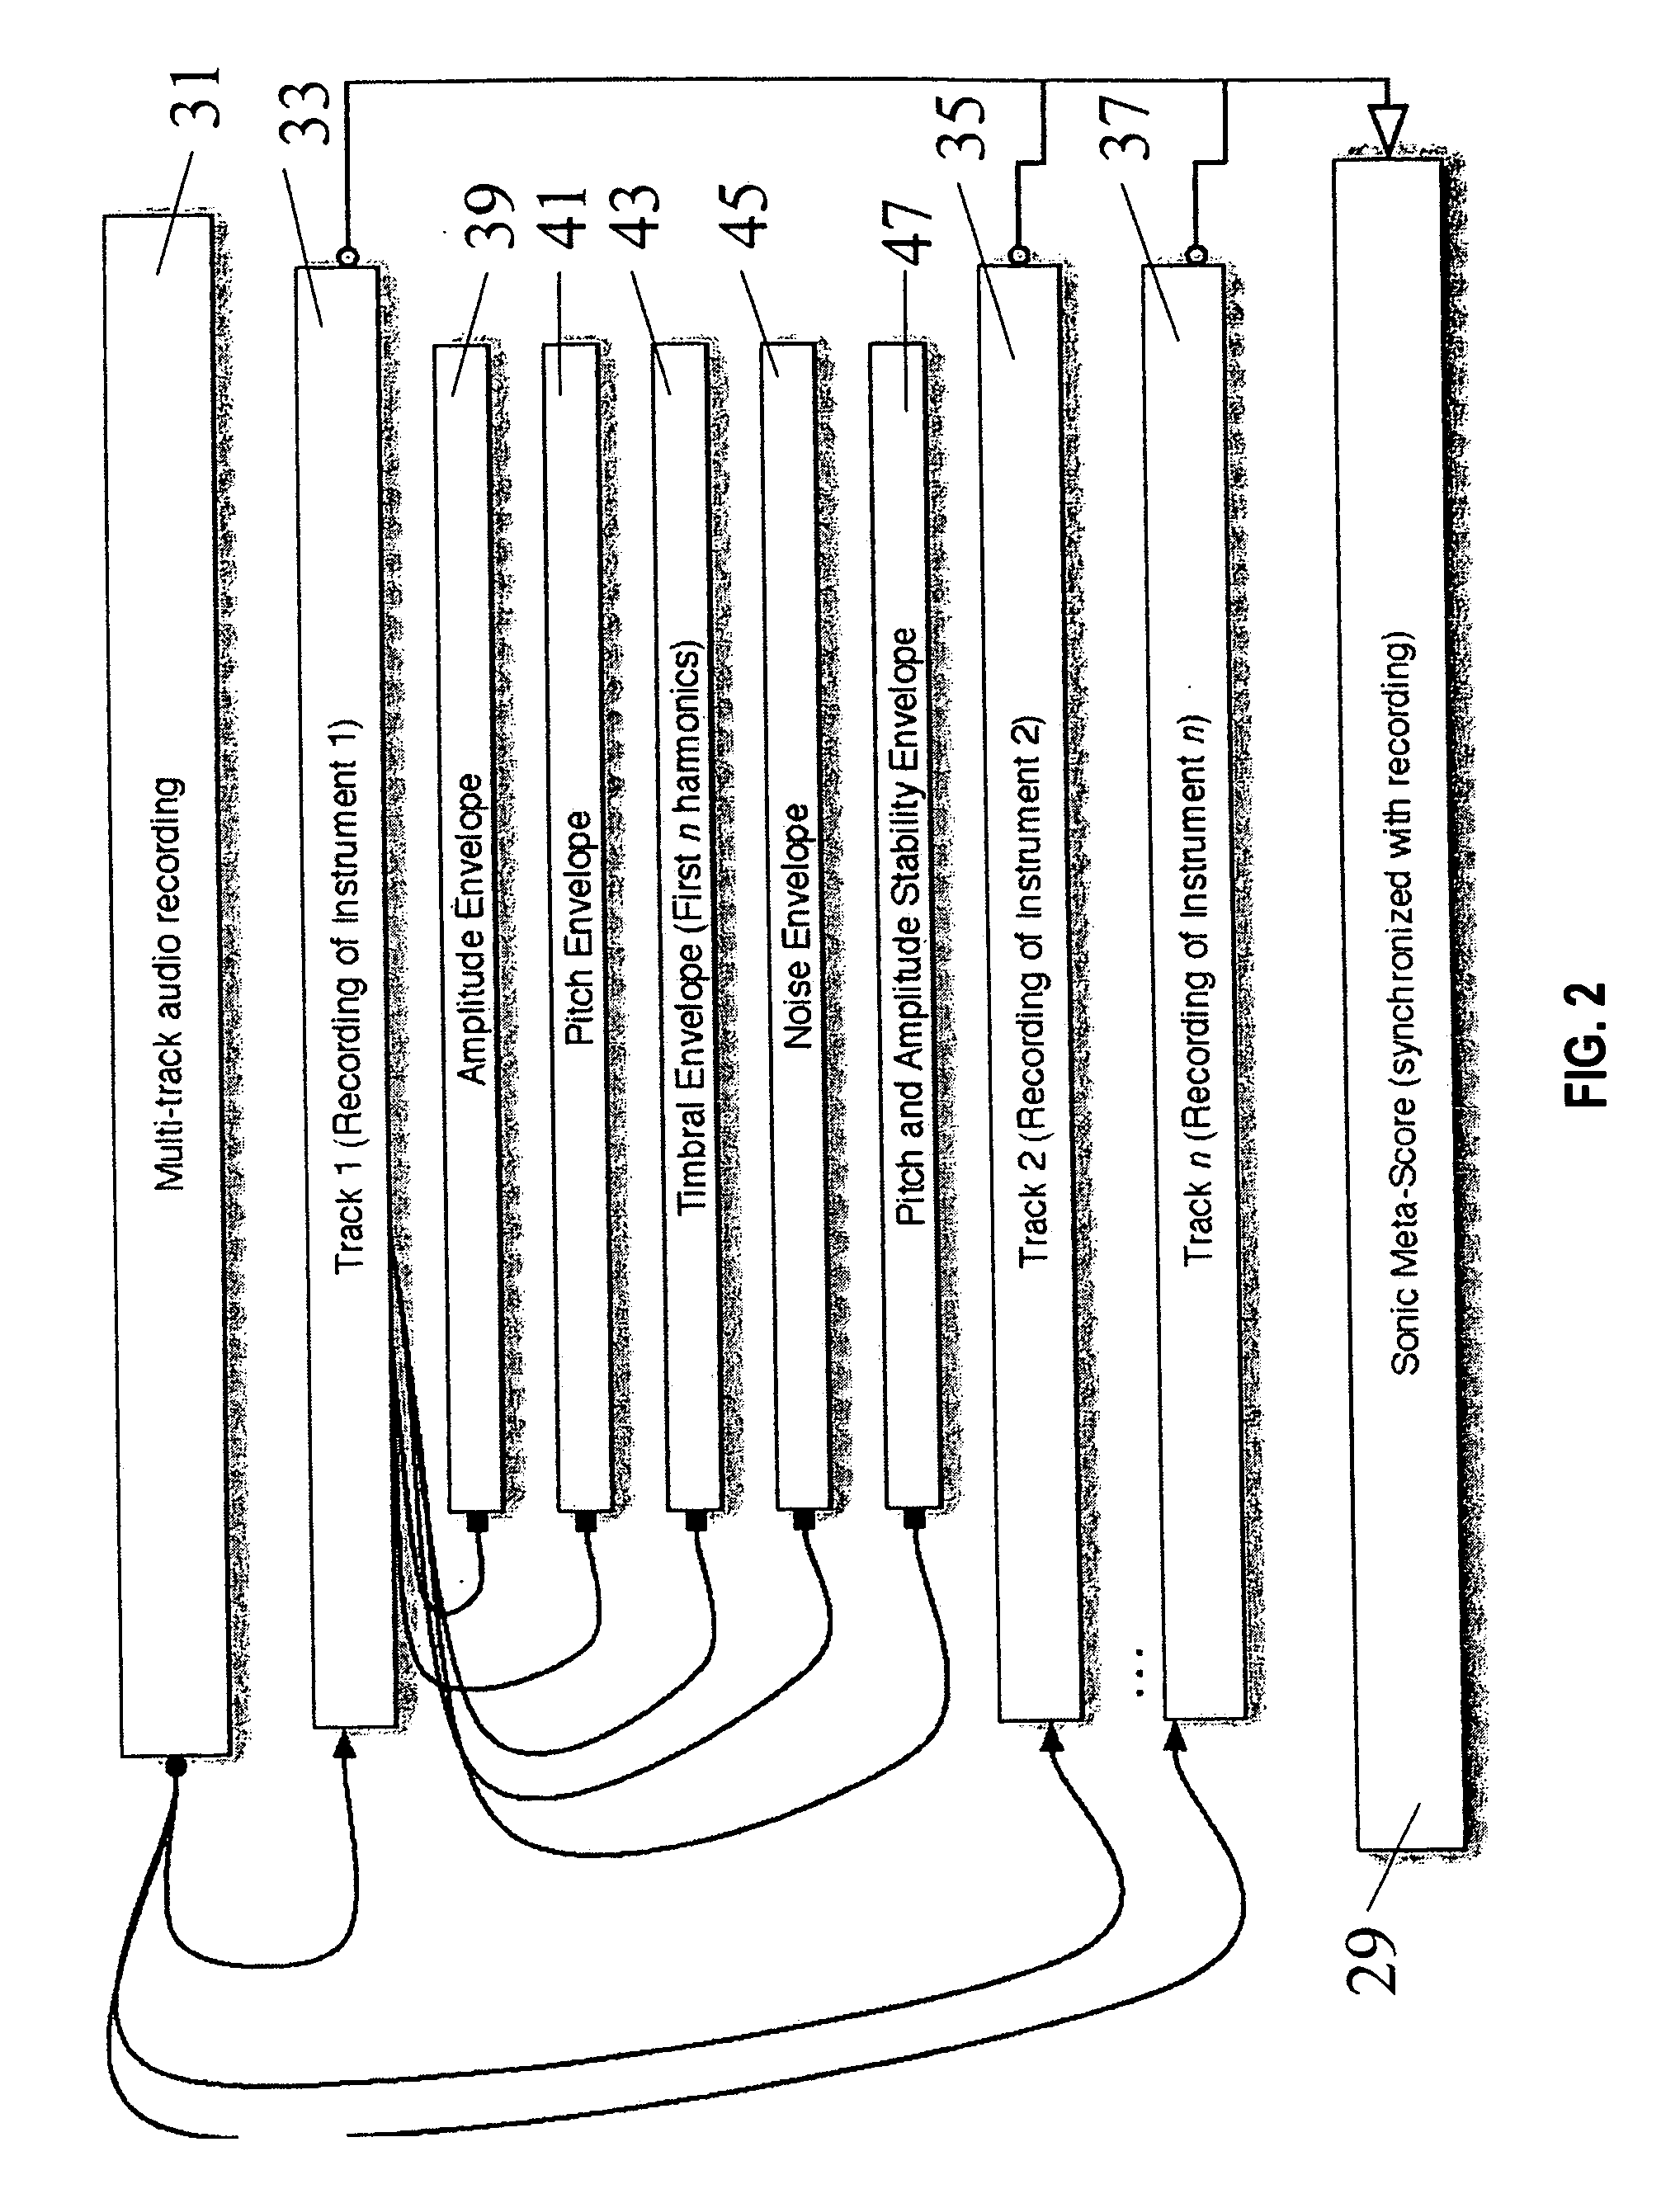 Interactive tool and appertaining method for creating a graphical music display